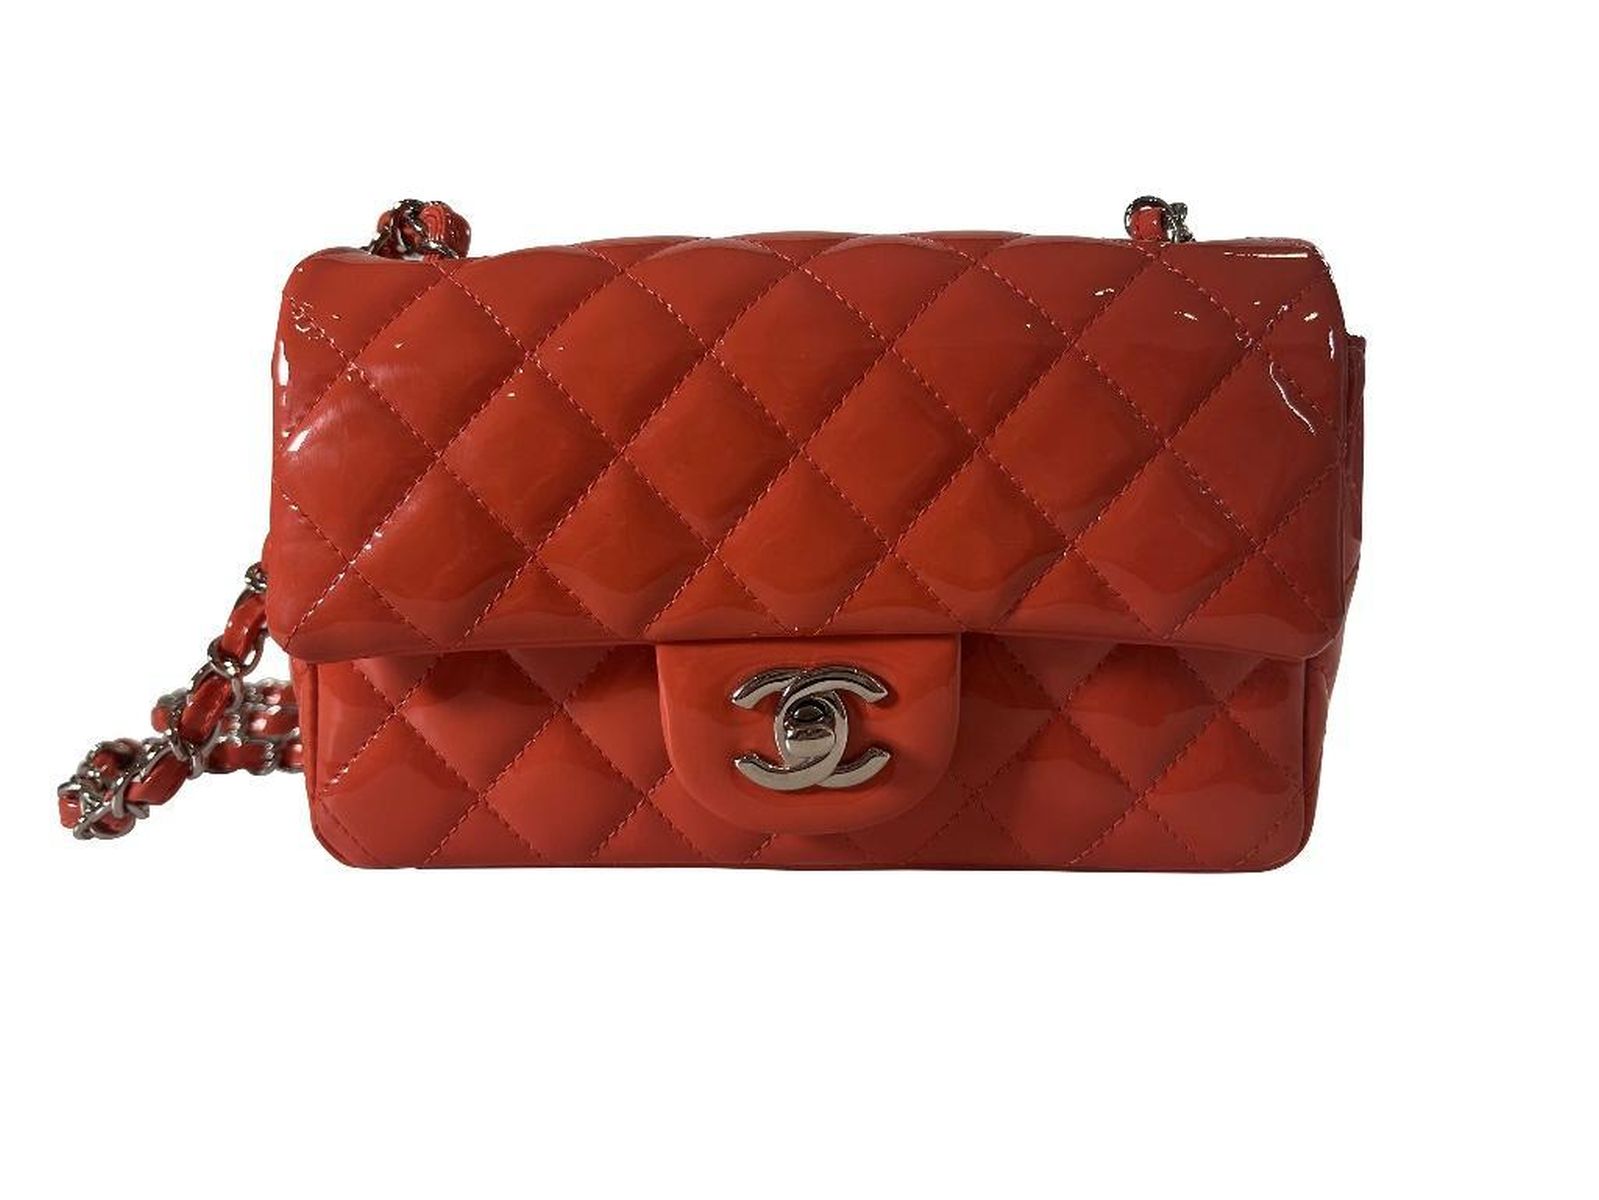 Chanel Coral Chevron Quilted Patent Leather Mini Flap Bag